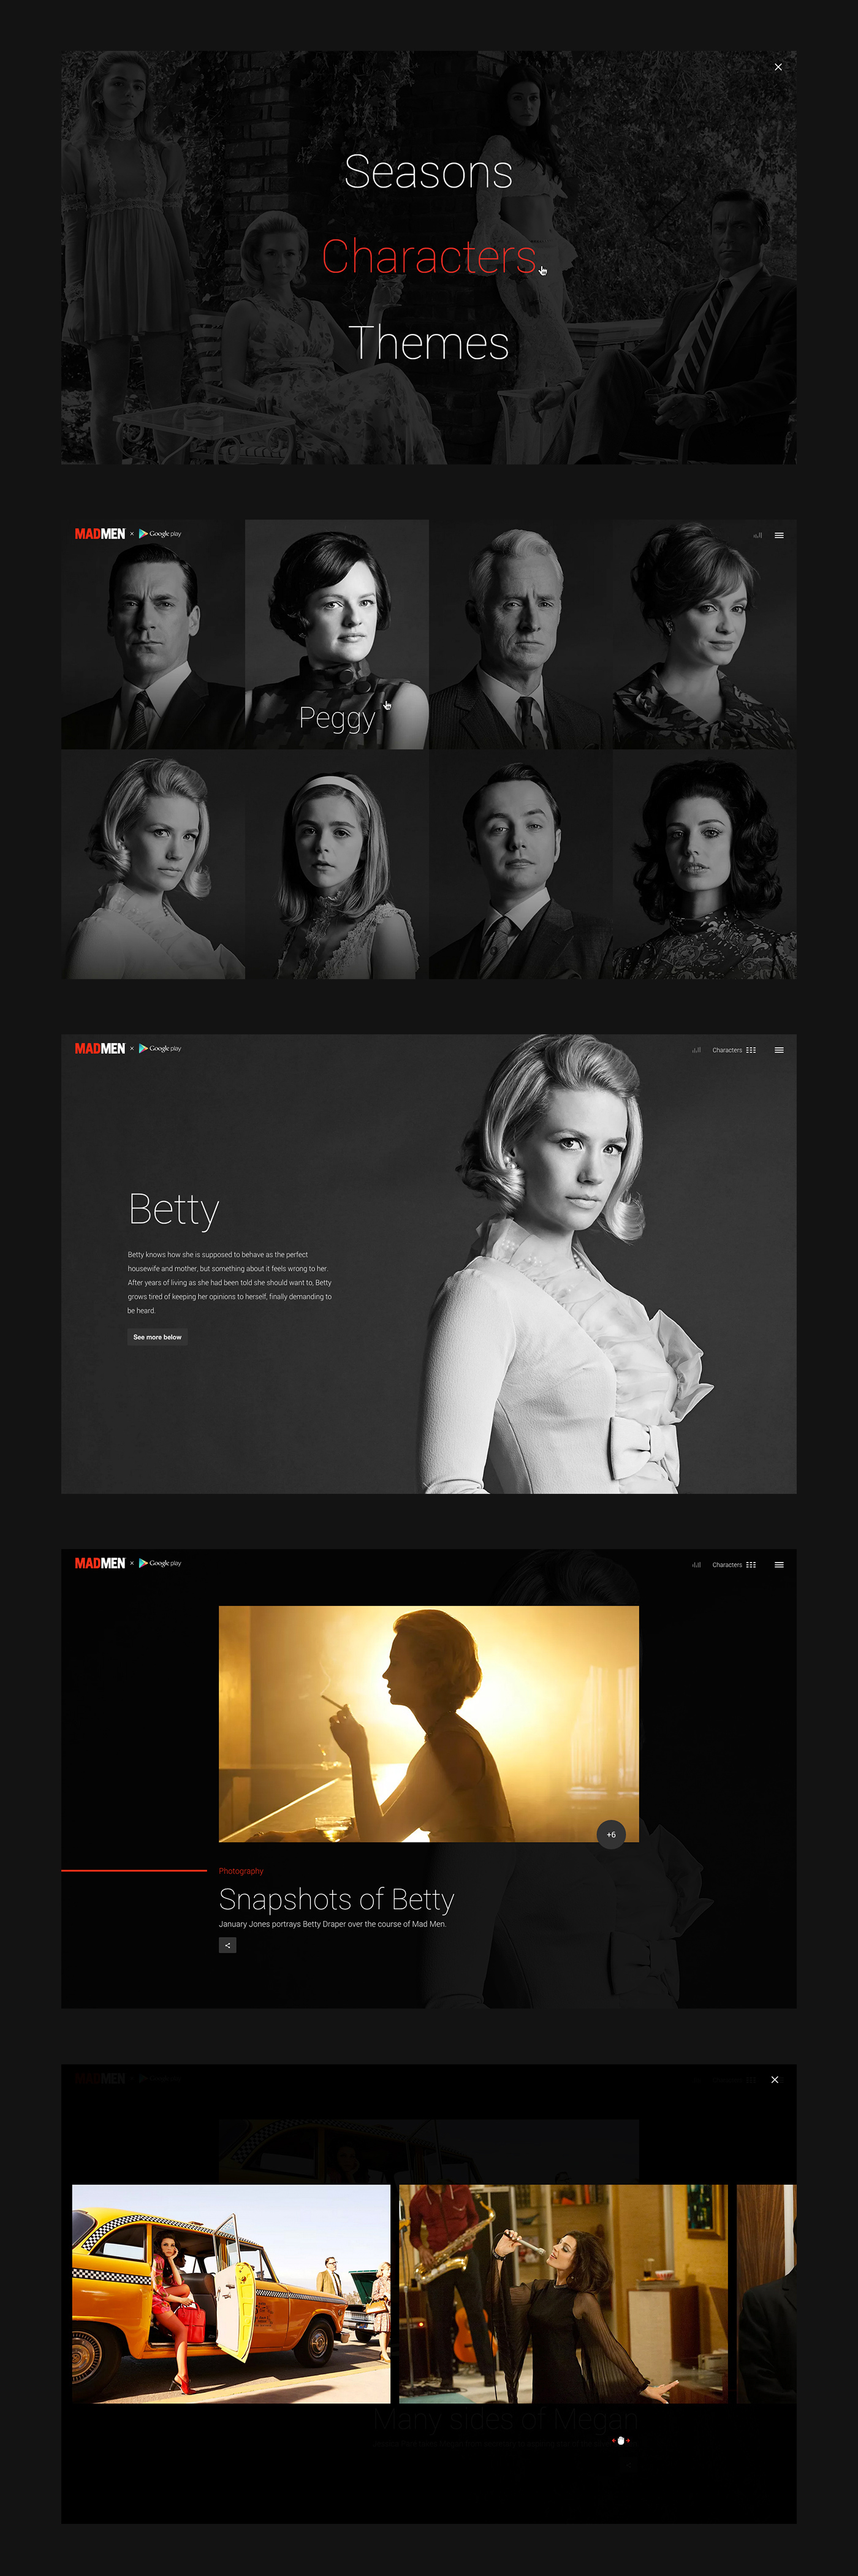 mad men Google Play Archive interactive google history video Mad gallery timeline